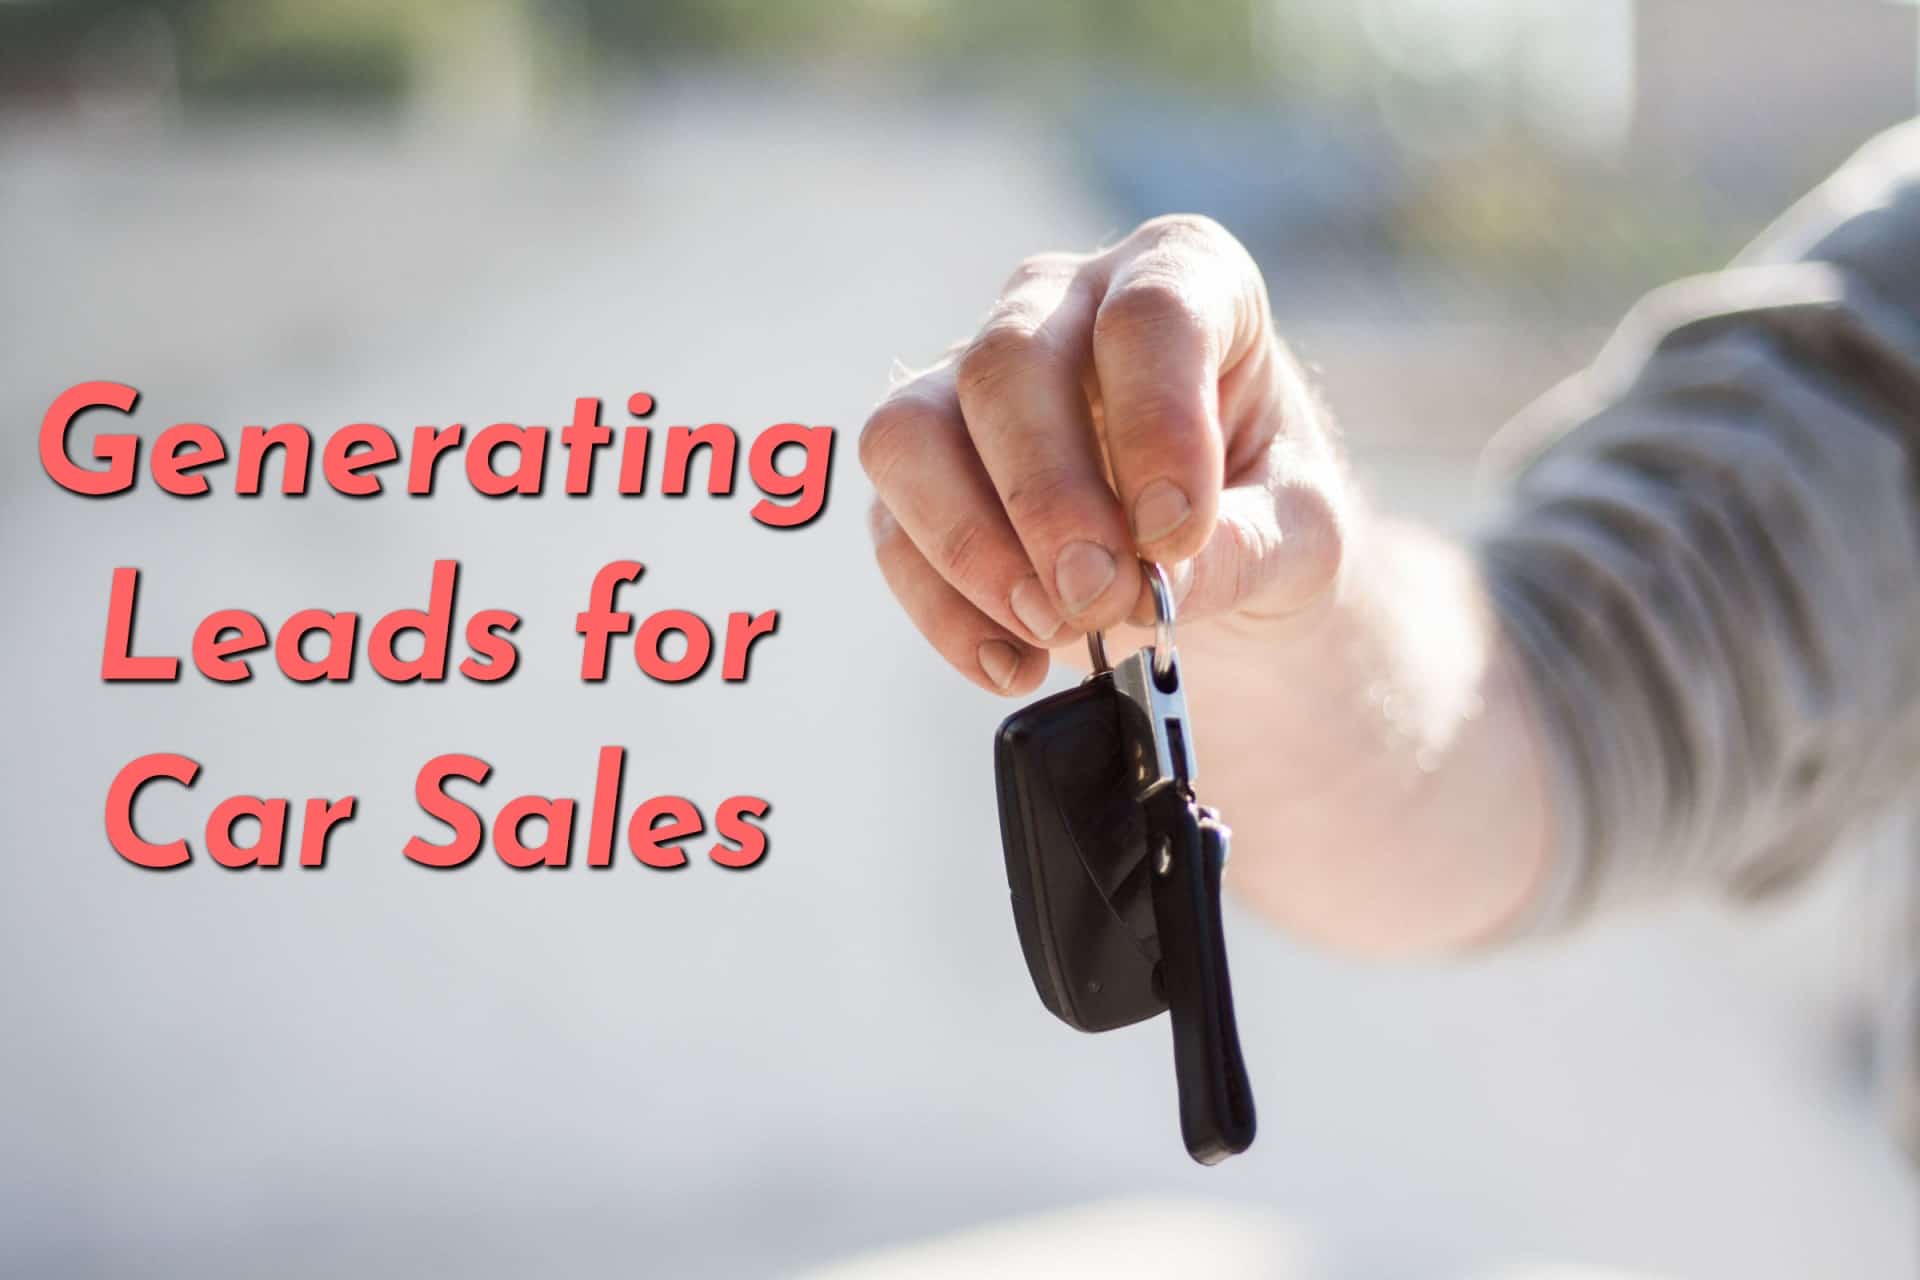 A car salesman generating leads for car sales and holding a set of car keys